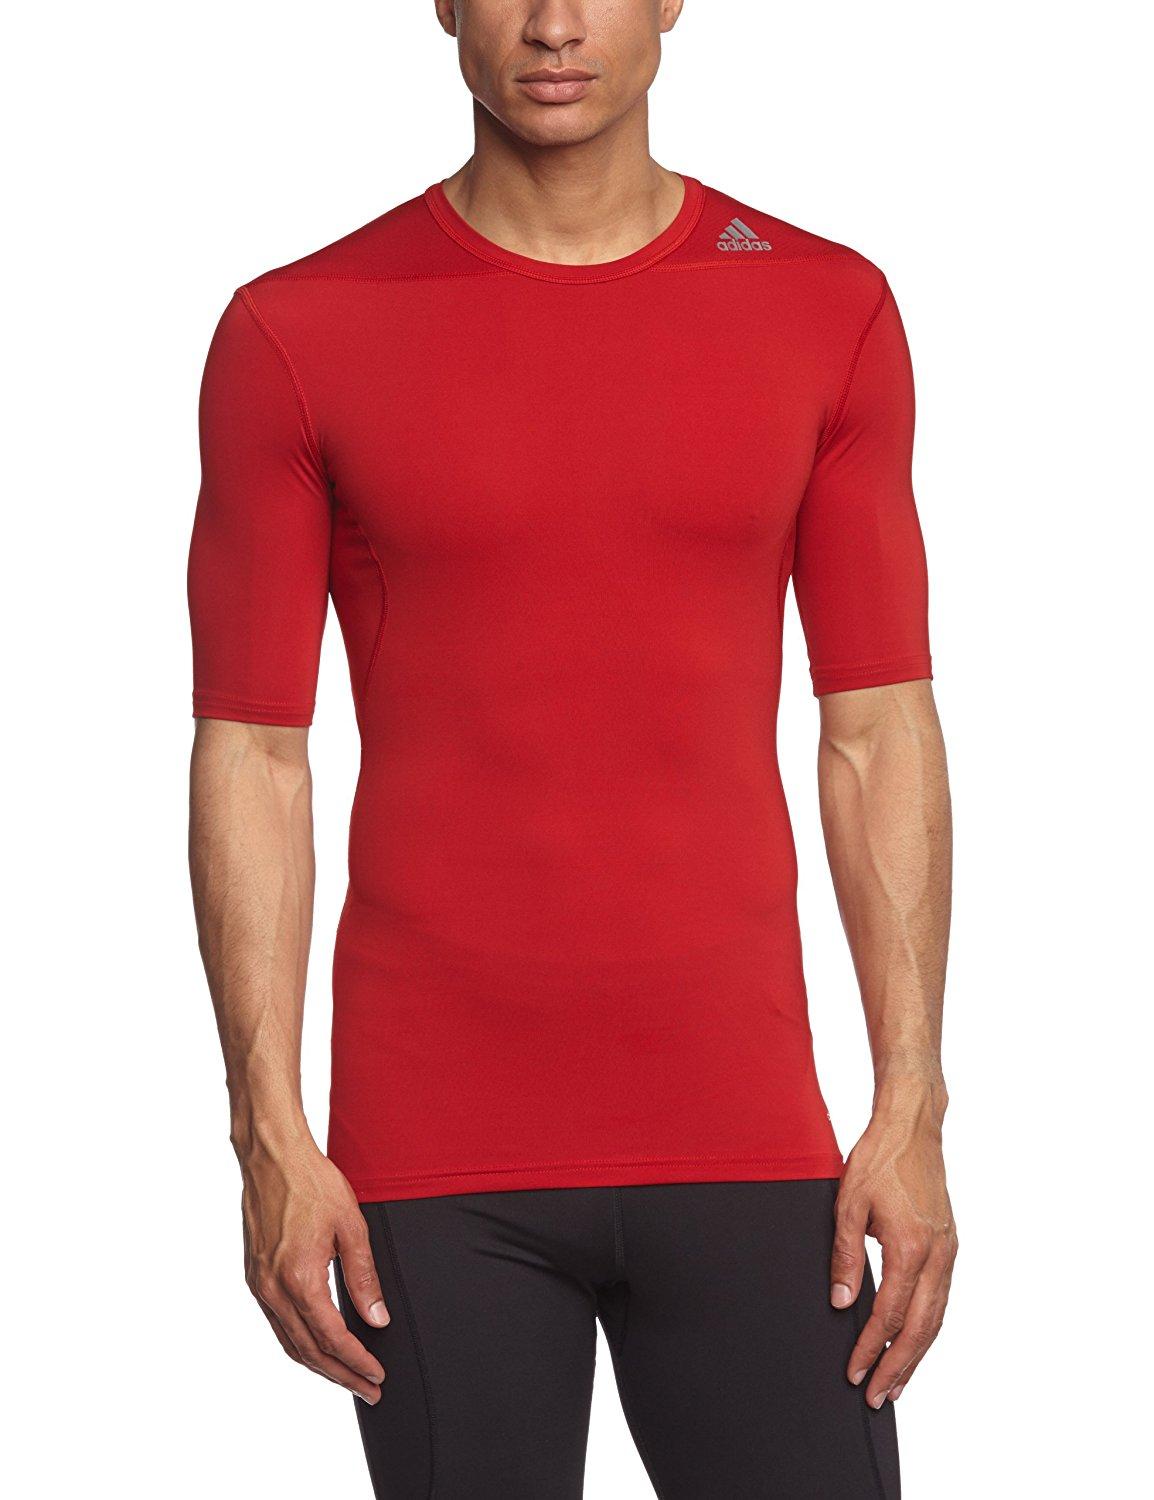 Adidas Tech-fit Base Compression Short Sleeve Top - Men Size S (Red) D82089